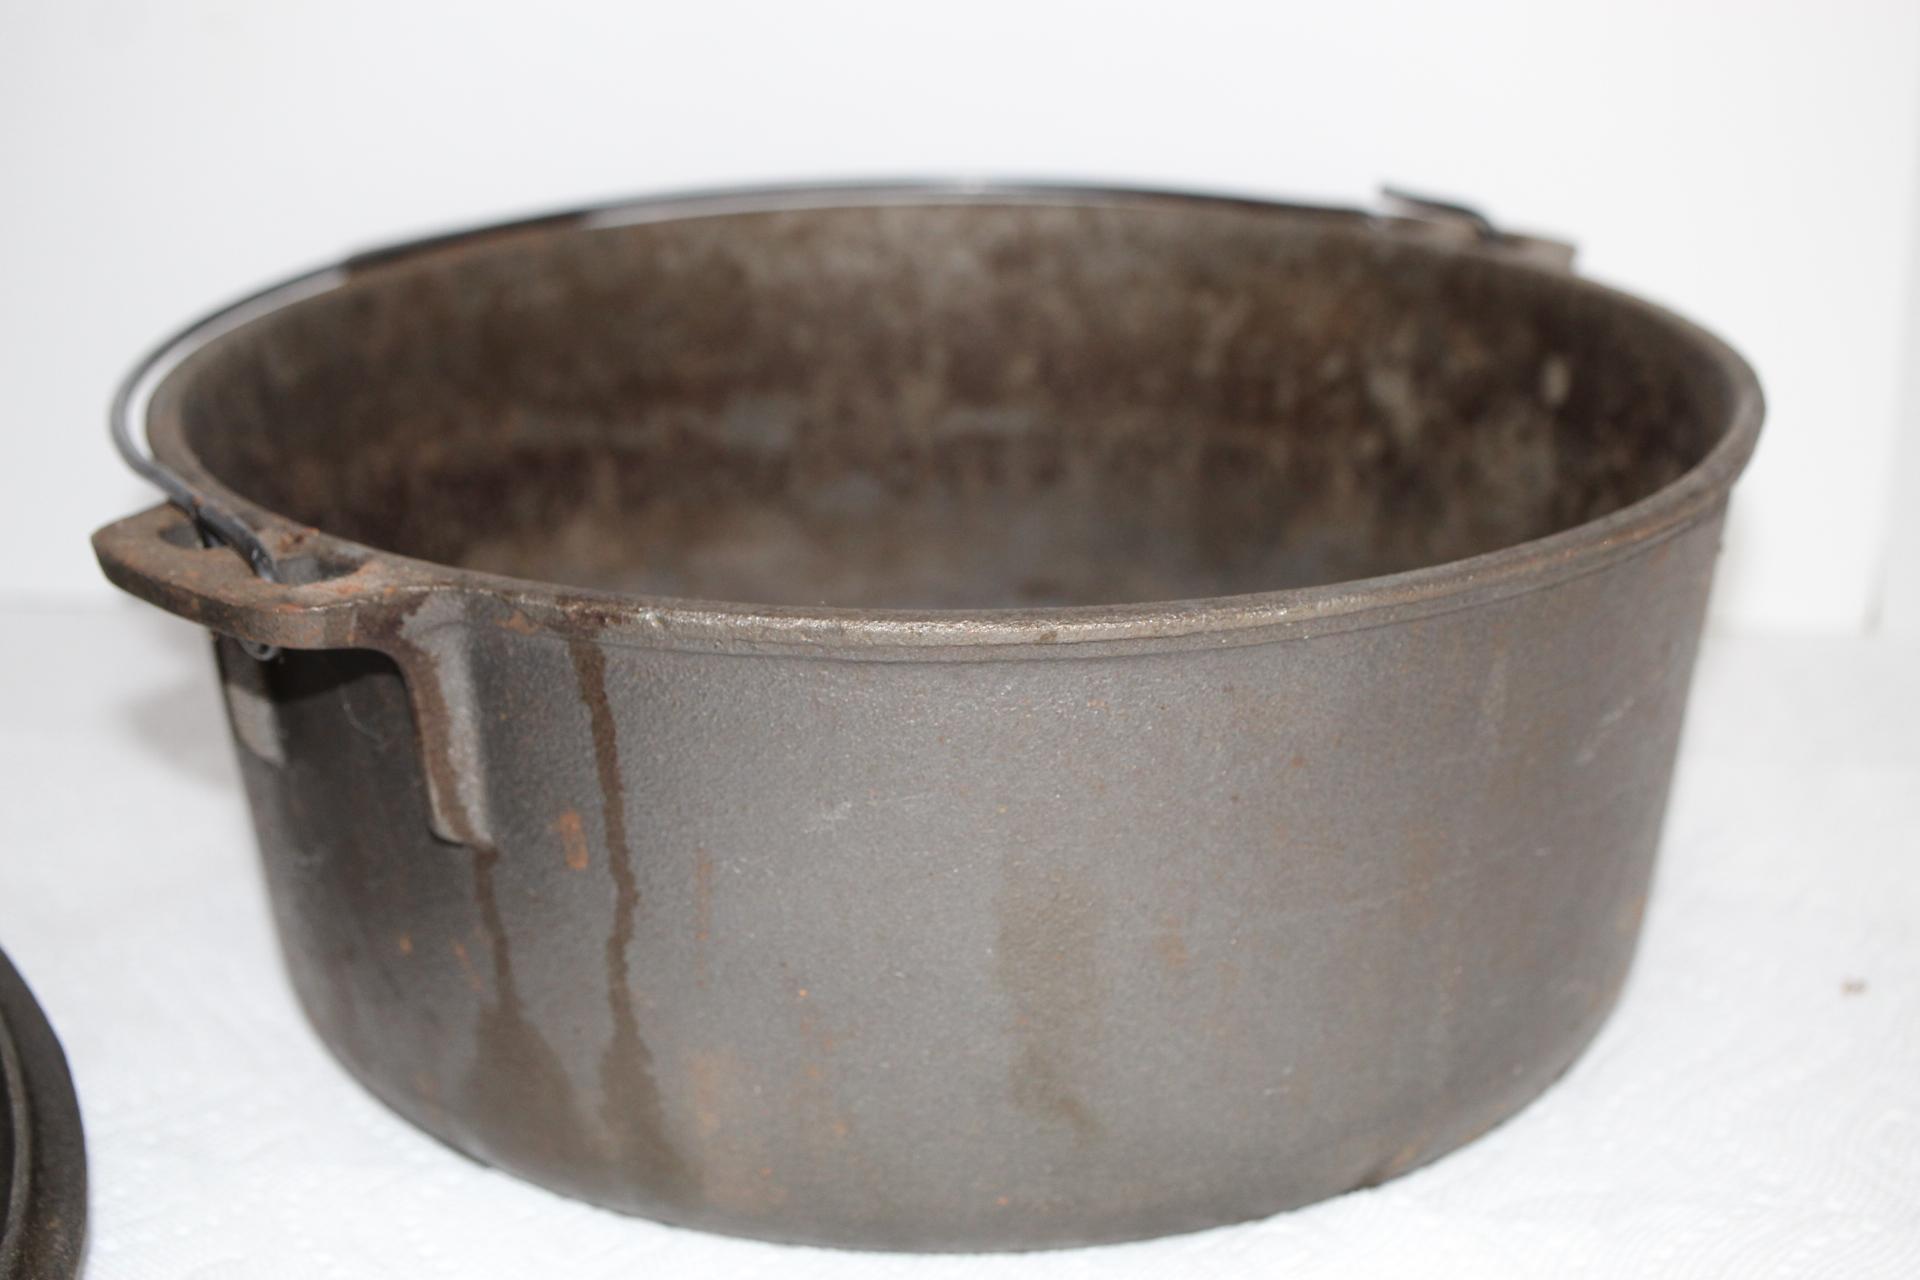 Cast Iron Dutch Oven, Made In Taiwan, 12" round at top